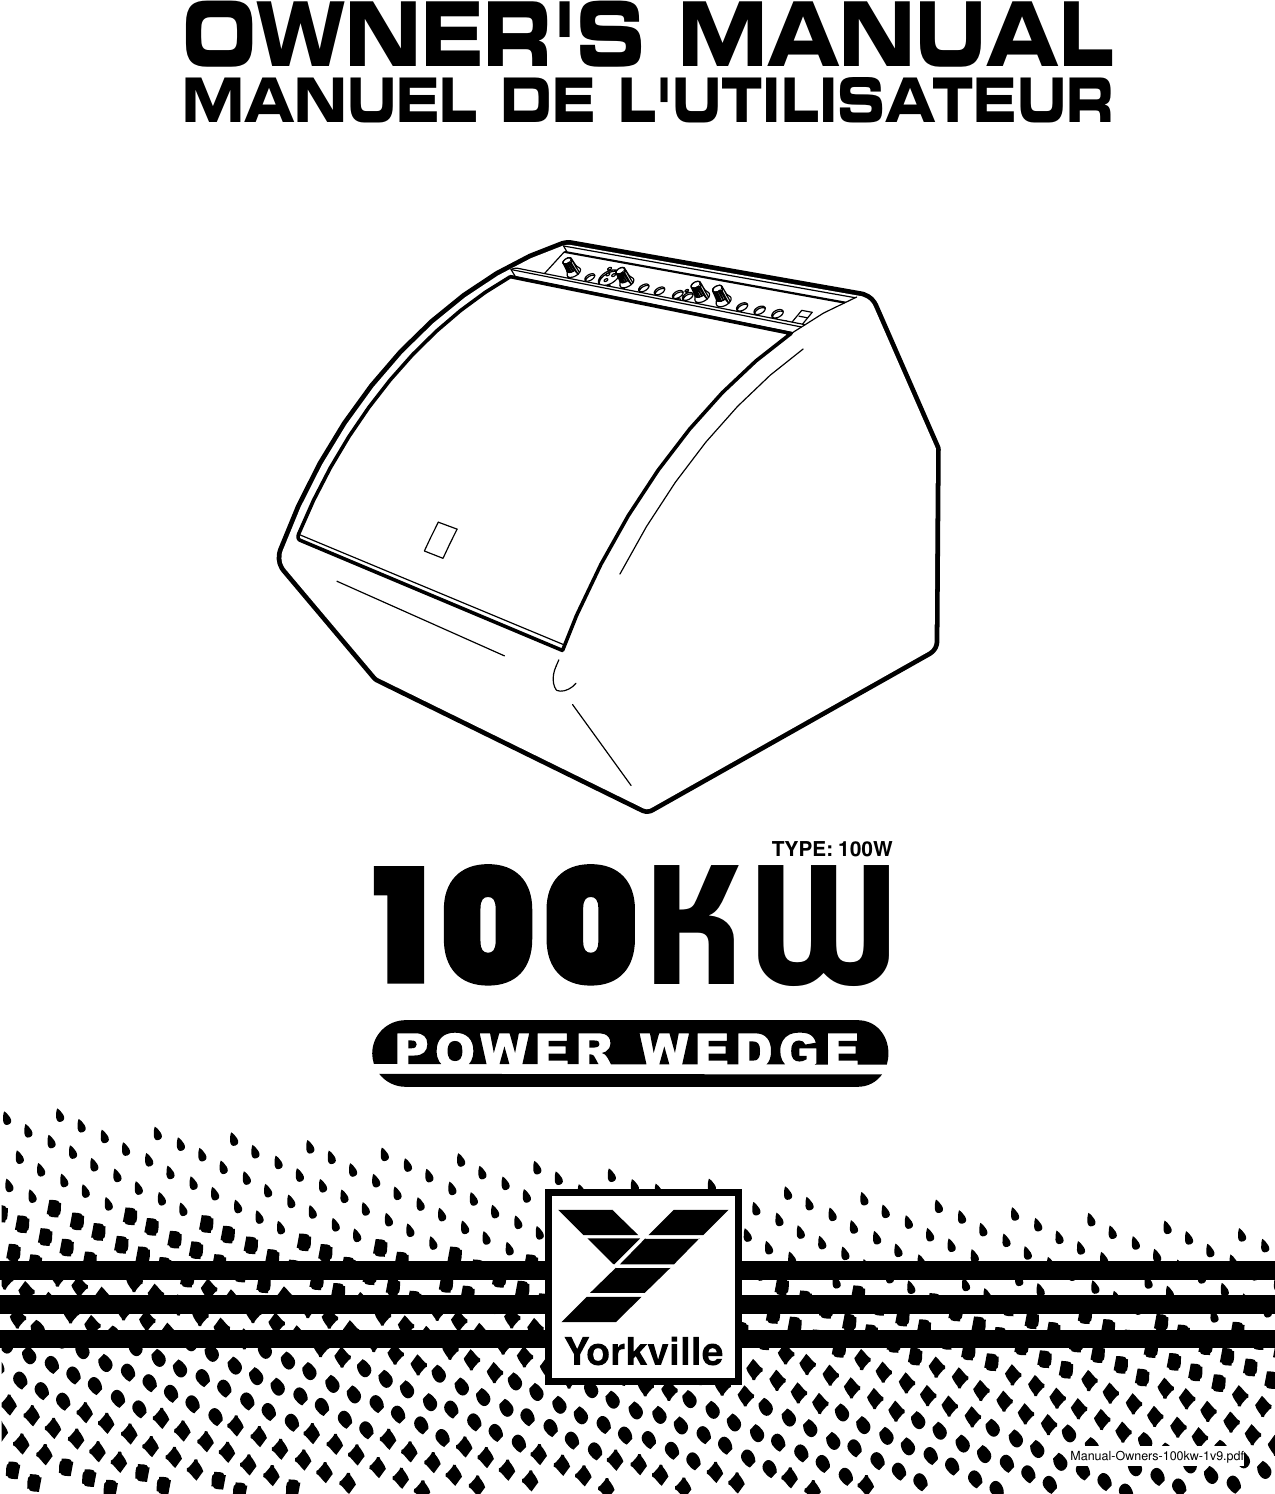 Page 1 of 8 - Yorkville 100W-Users-Manual Manual-Owners-100kw-1v9  Yorkville-100w-users-manual